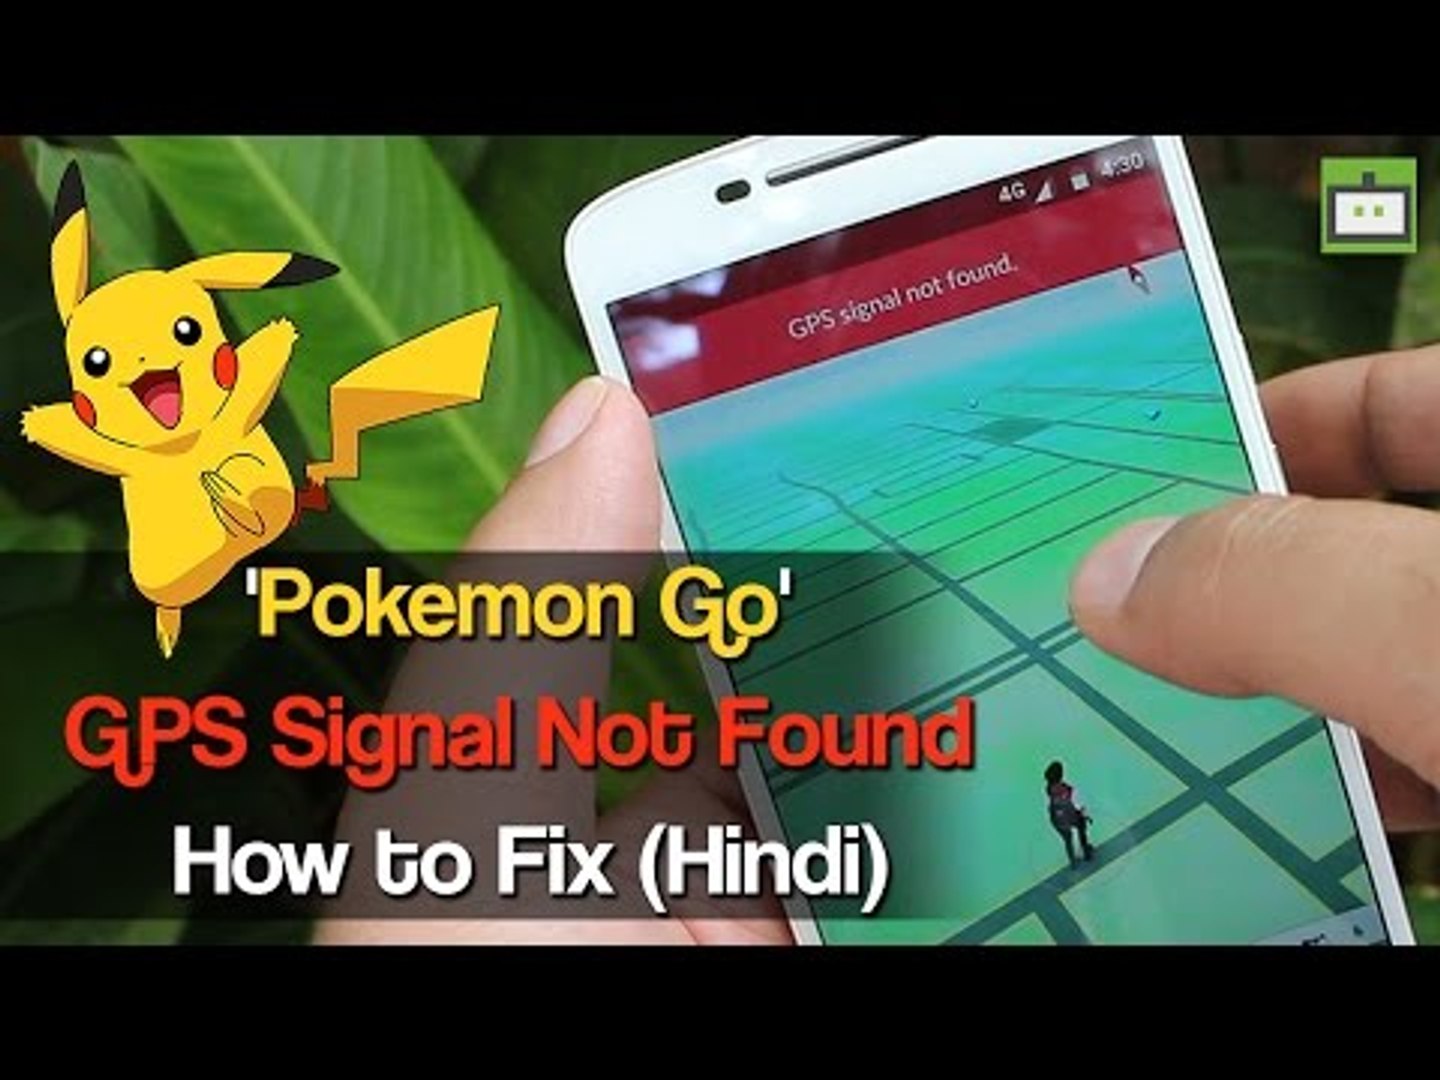 Pokemon Go' GPS Signal Not Found: How to Fix (Hindi) - video Dailymotion